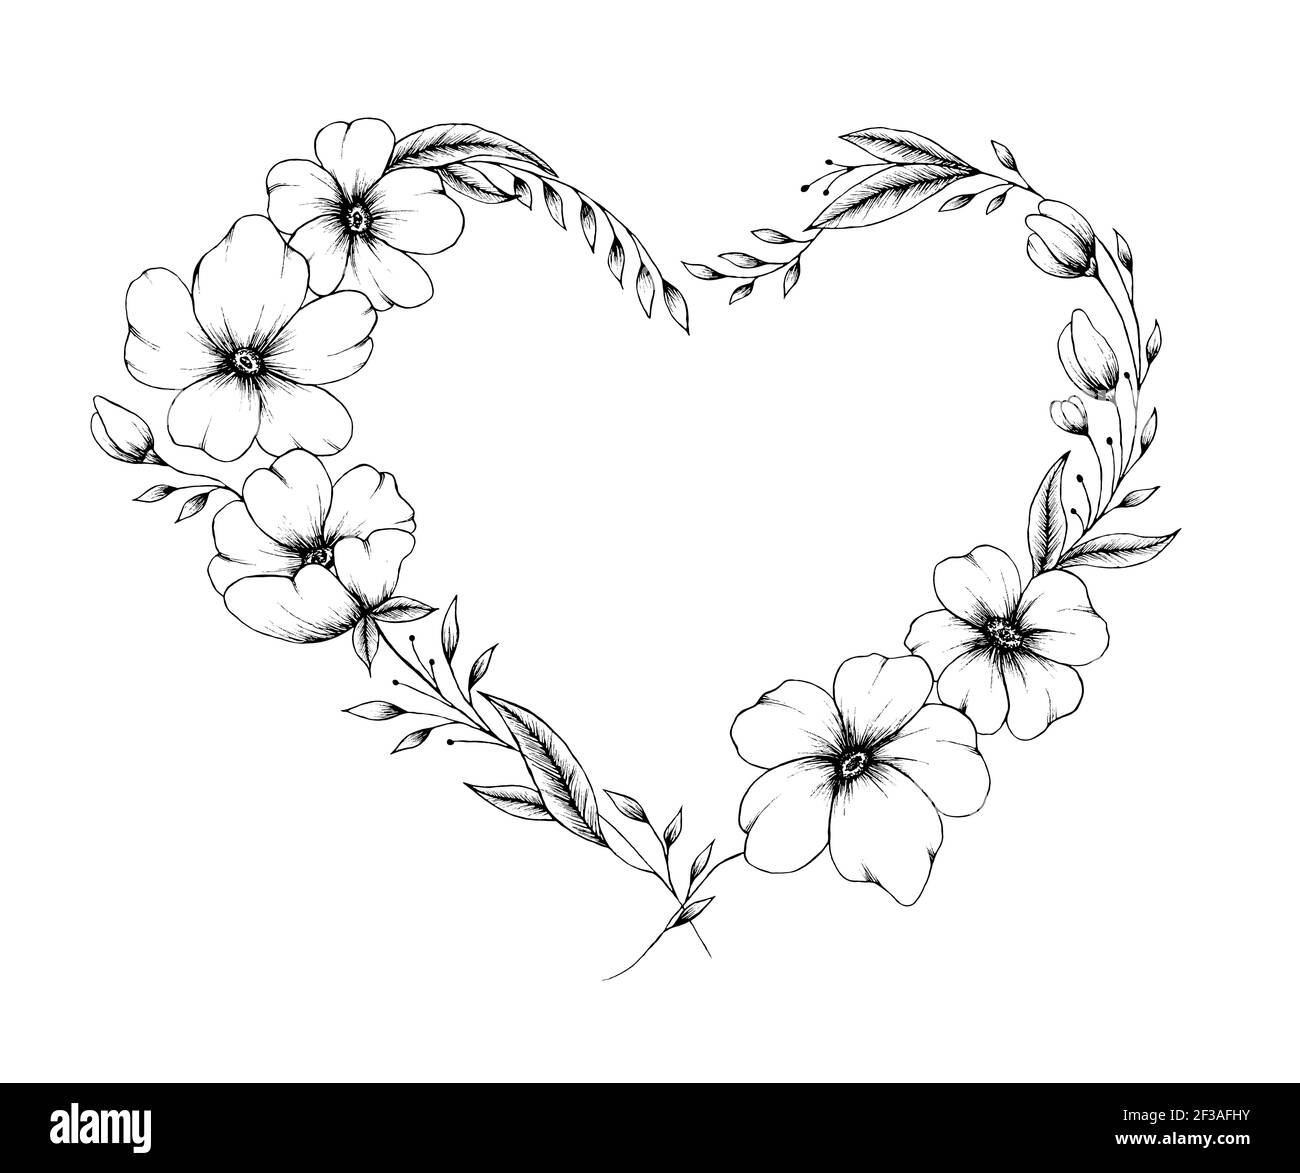 Hand drawn outline blooming heart illustration with floral elements, fine line heart art for mother's day, Valentine's day or weddings, black floral Stock Photo